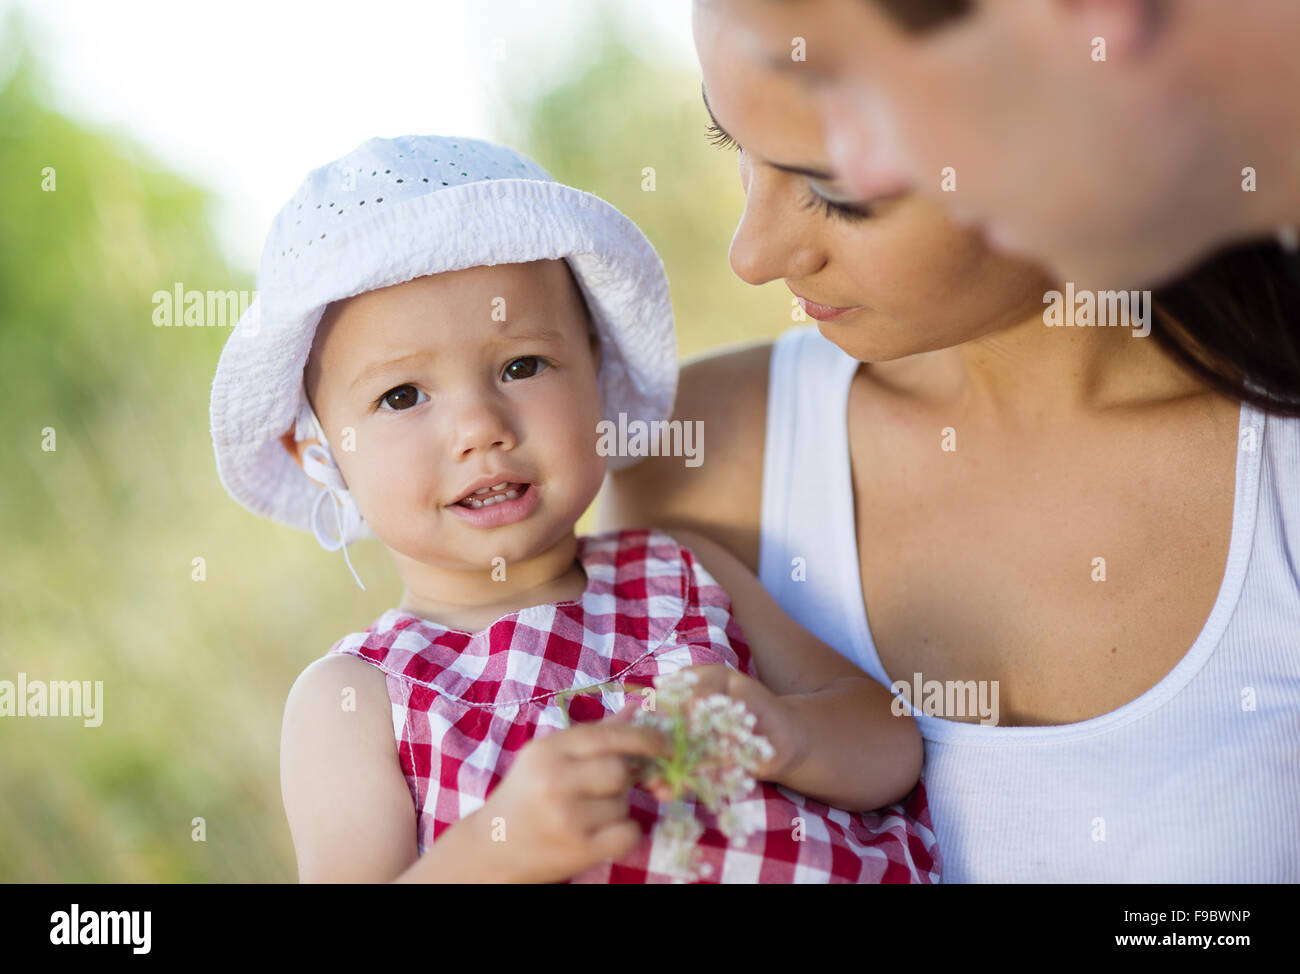 Happy young family spending time together in green nature. Stock Photo